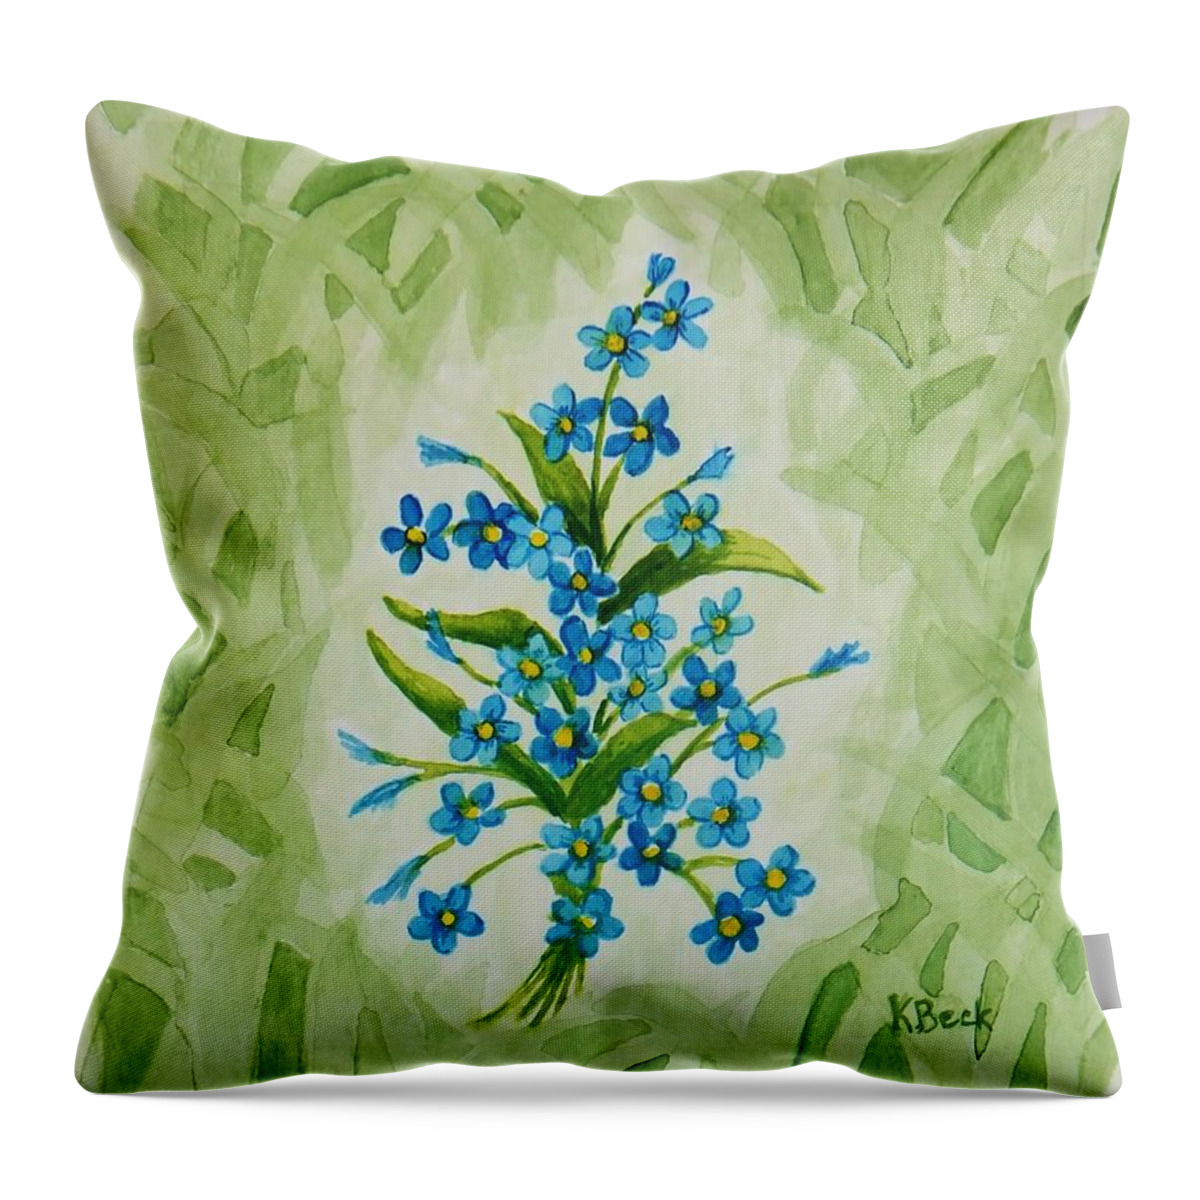 Print Throw Pillow featuring the painting For-Get-Me-Nots by Katherine Young-Beck